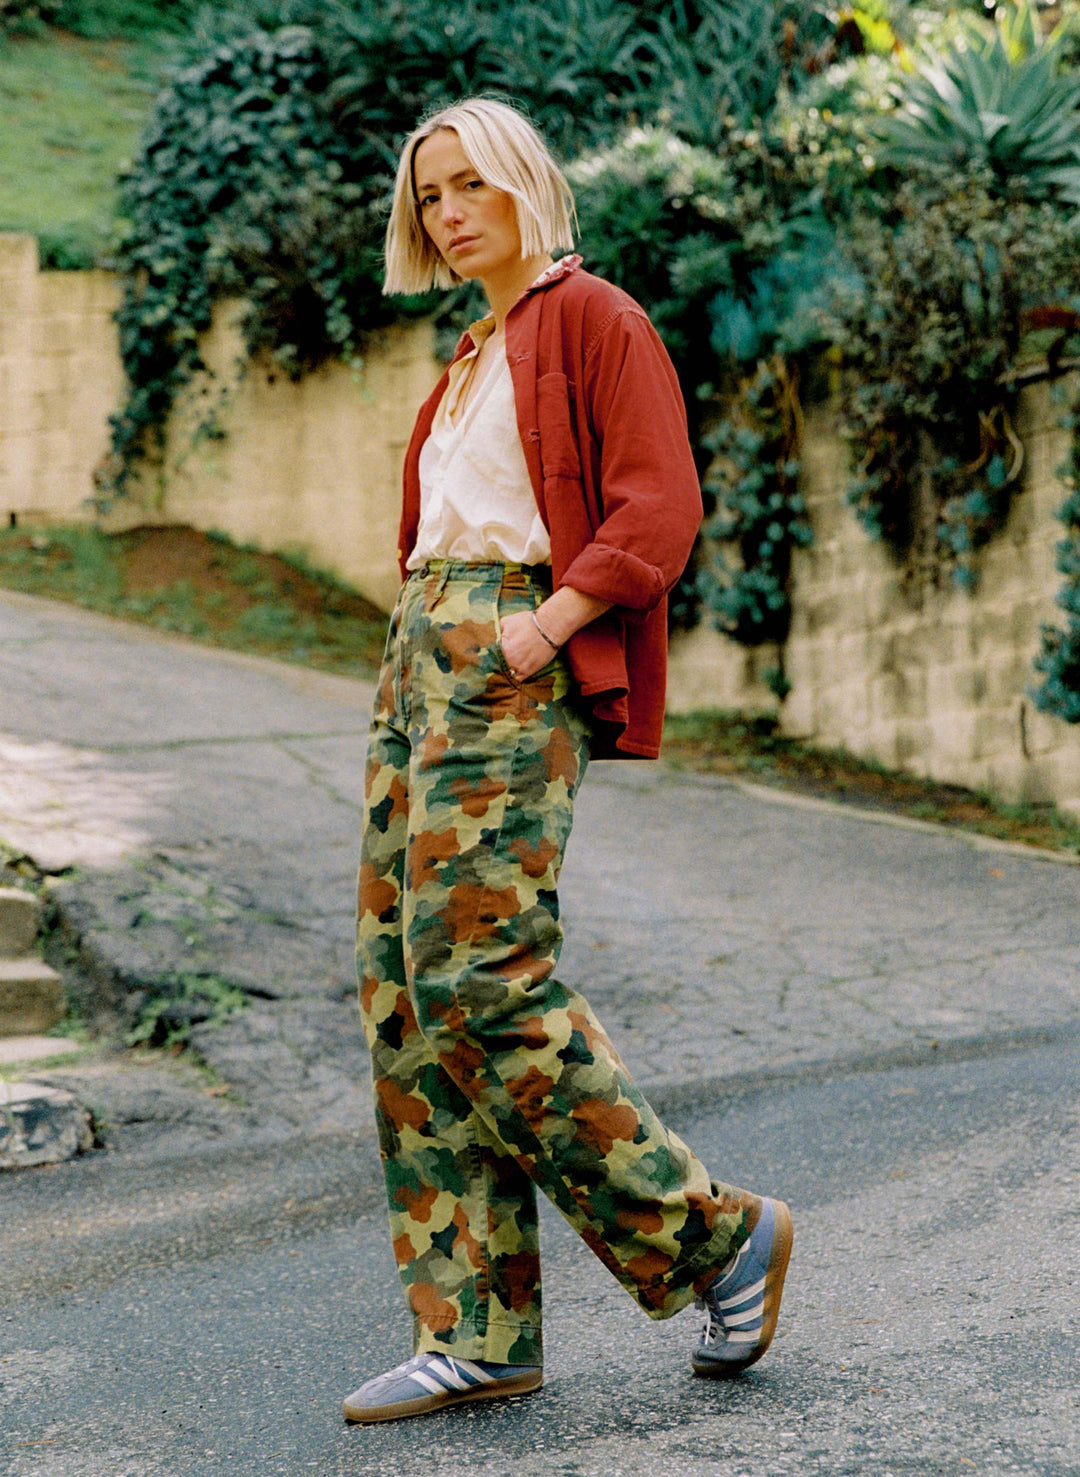 a woman in a red jacket and pants